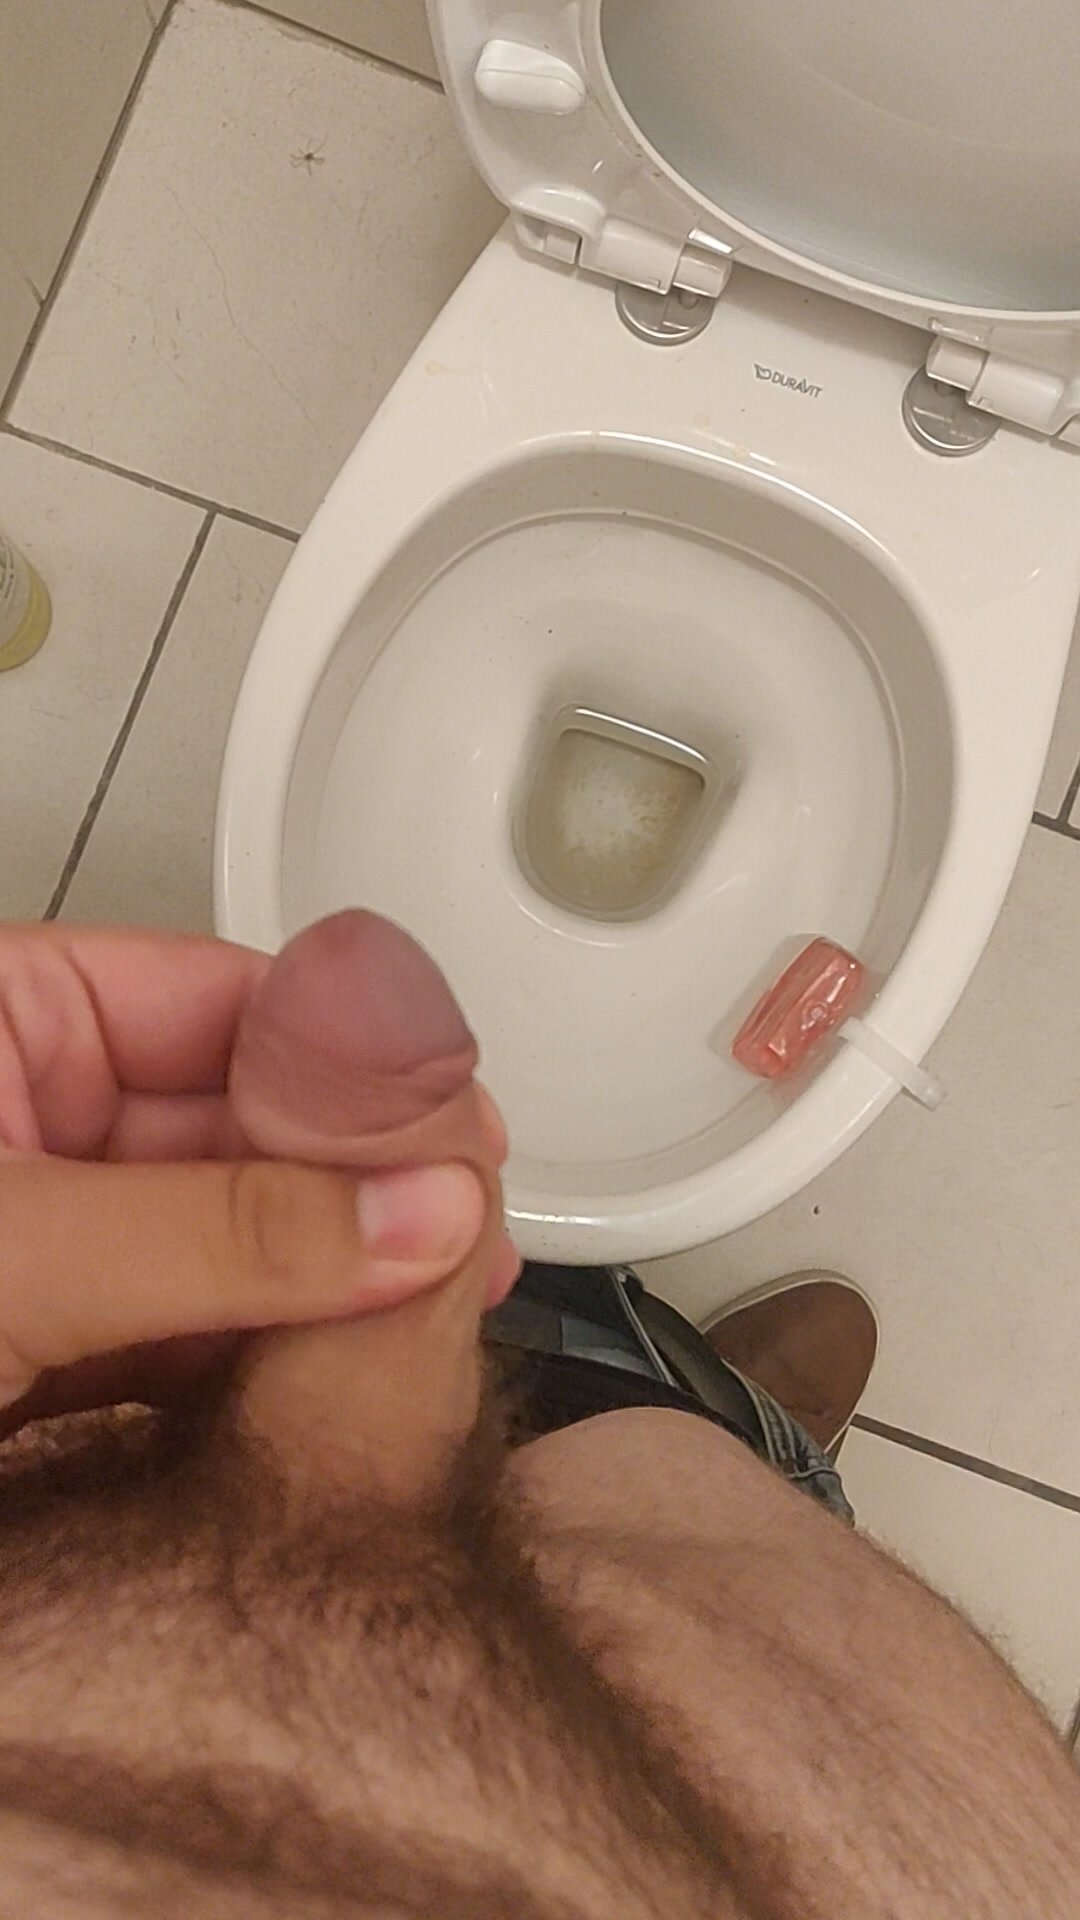 Pulling back while peeing